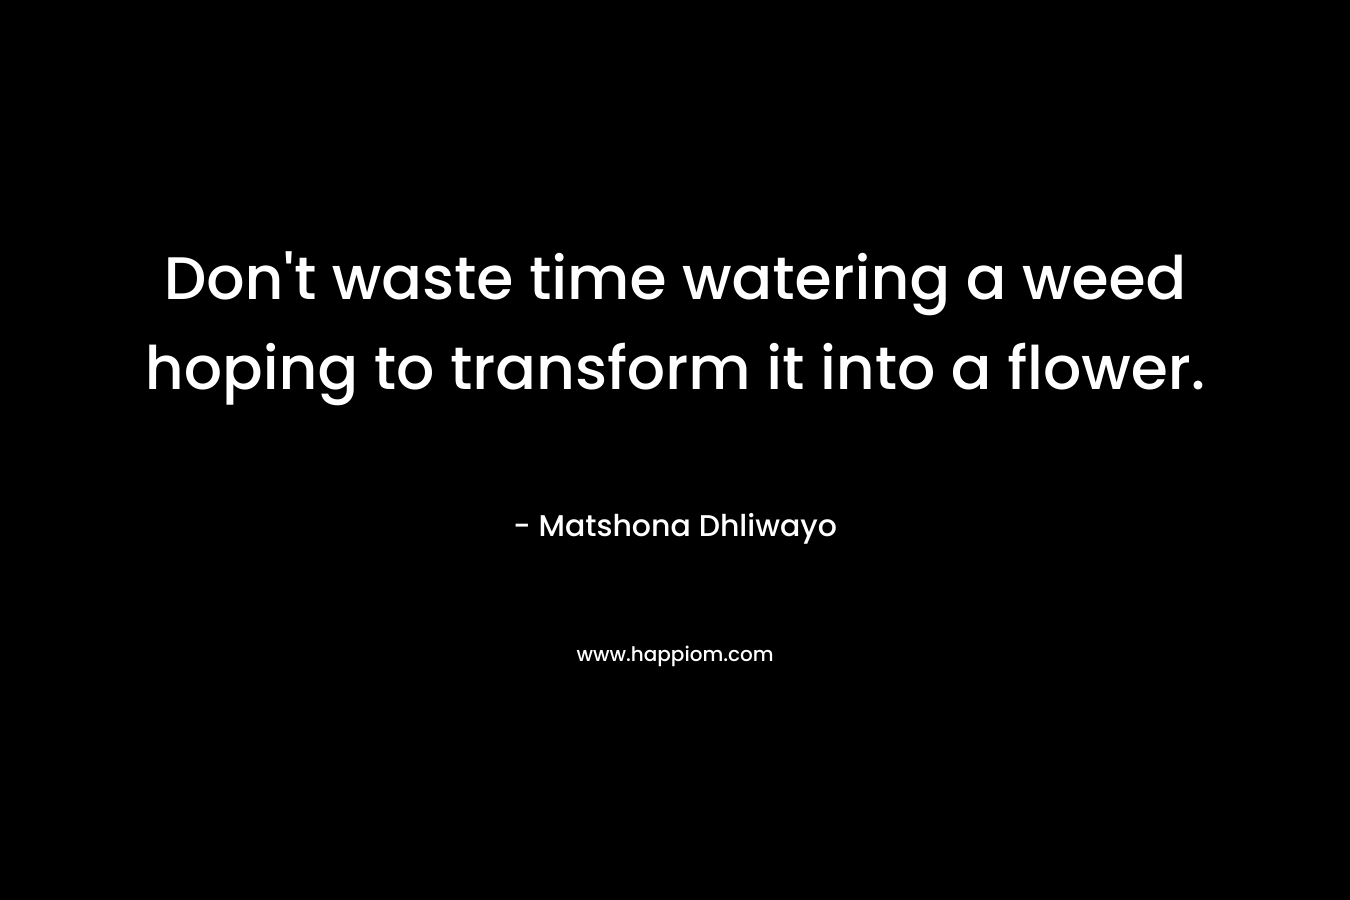 Don't waste time watering a weed hoping to transform it into a flower.